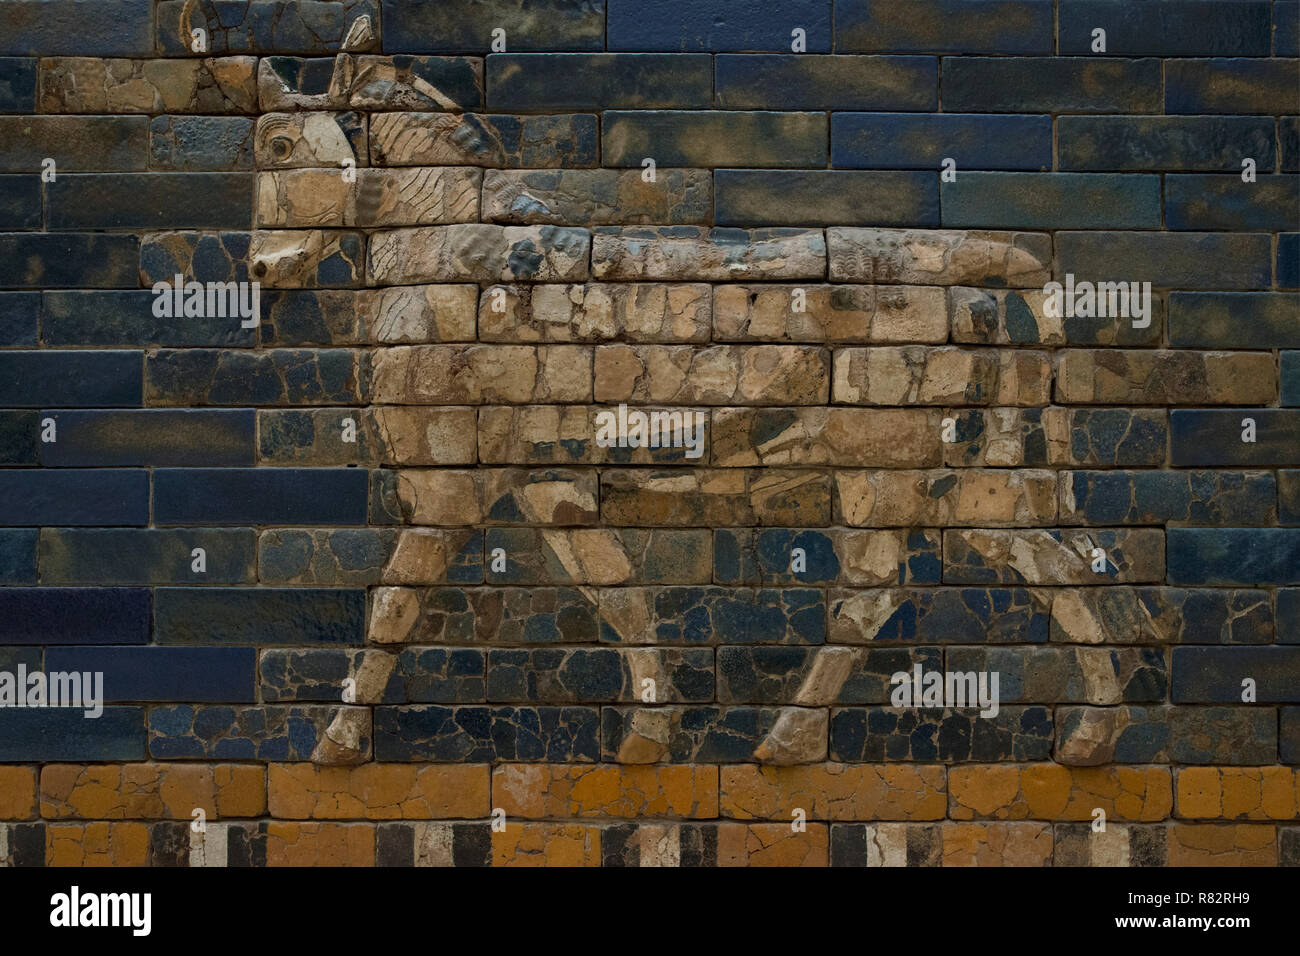 An animal relief depicting an aurchs. Detail of the glazed facade from the reconstructed Ishtar Gate (Babylon) in the Pergamon Museum in Berlin. Stock Photo